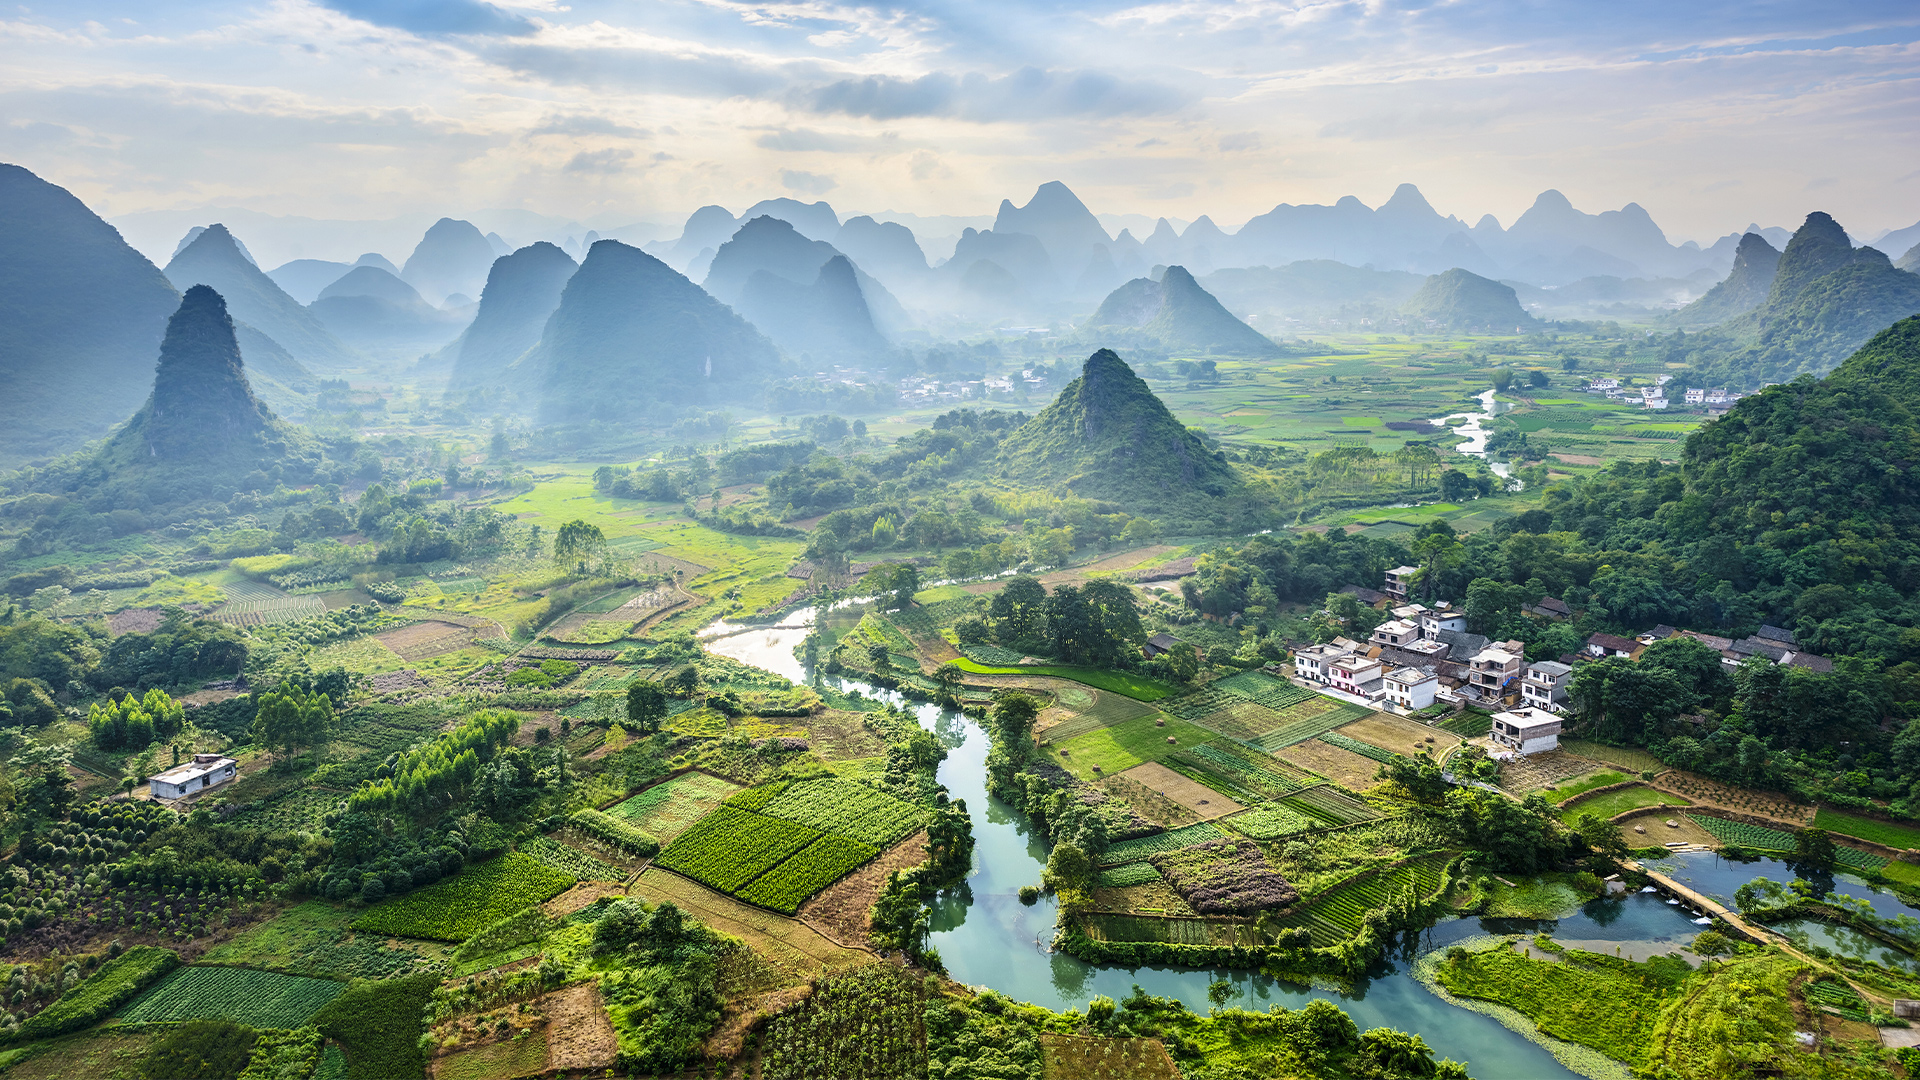 Destinations: Landscape of Guilin, Li River and Karst Mountains in Guangxi Province, China, Asia